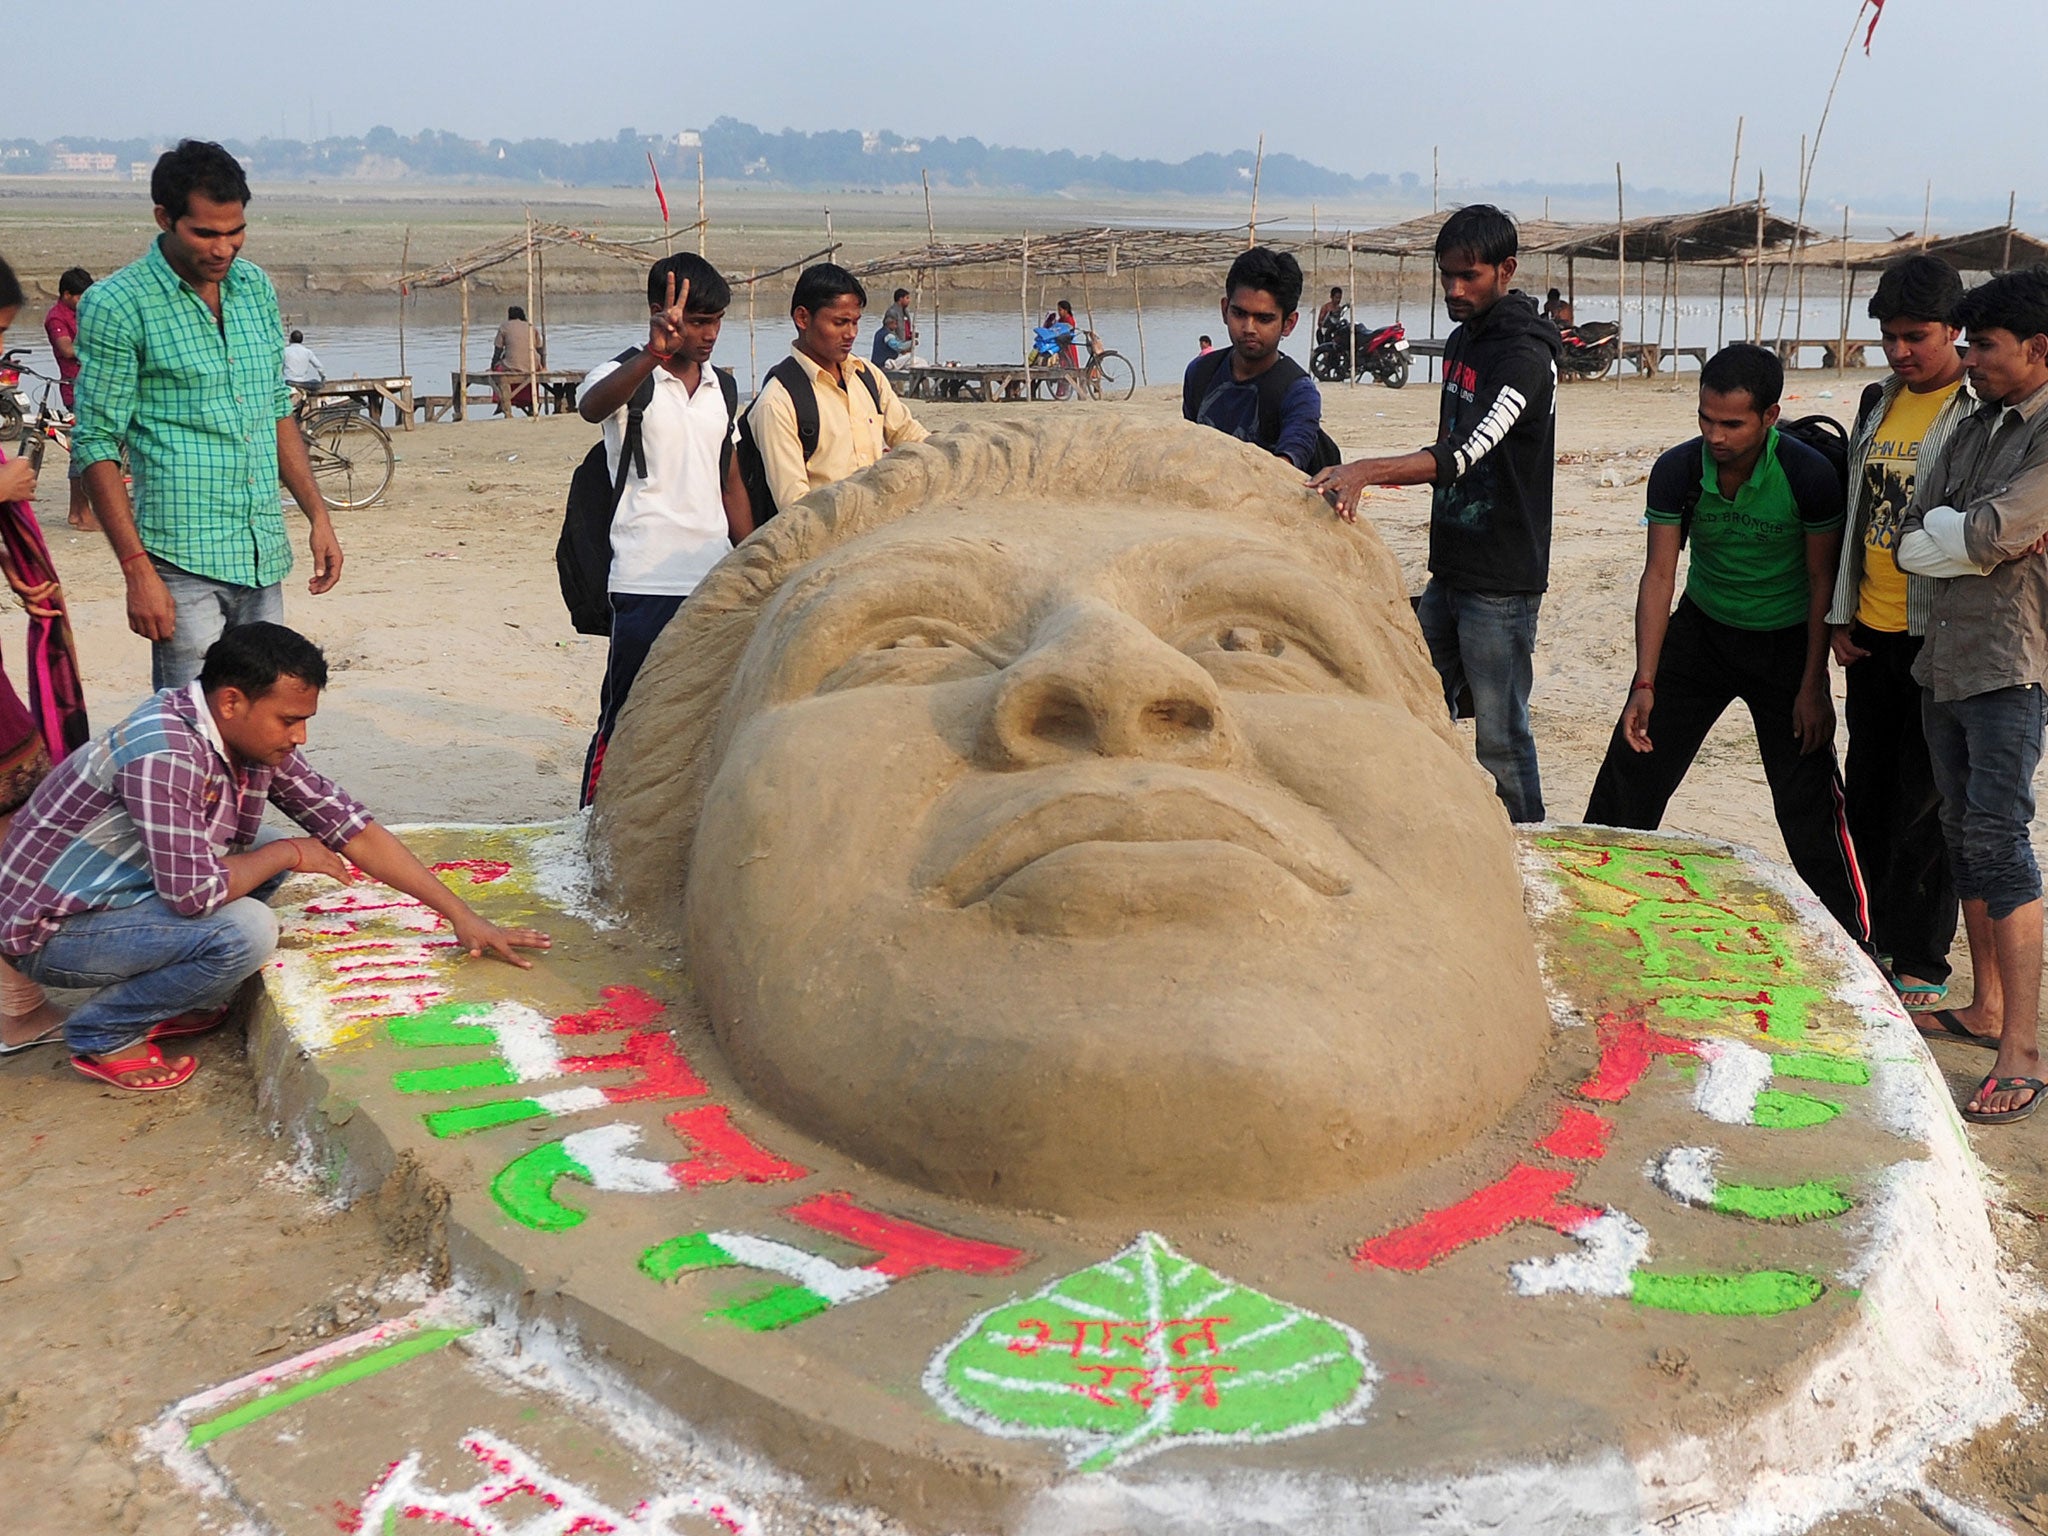 University students carve an image of Sachin Tendulkar in the sand in tribute to the retiring cricketer